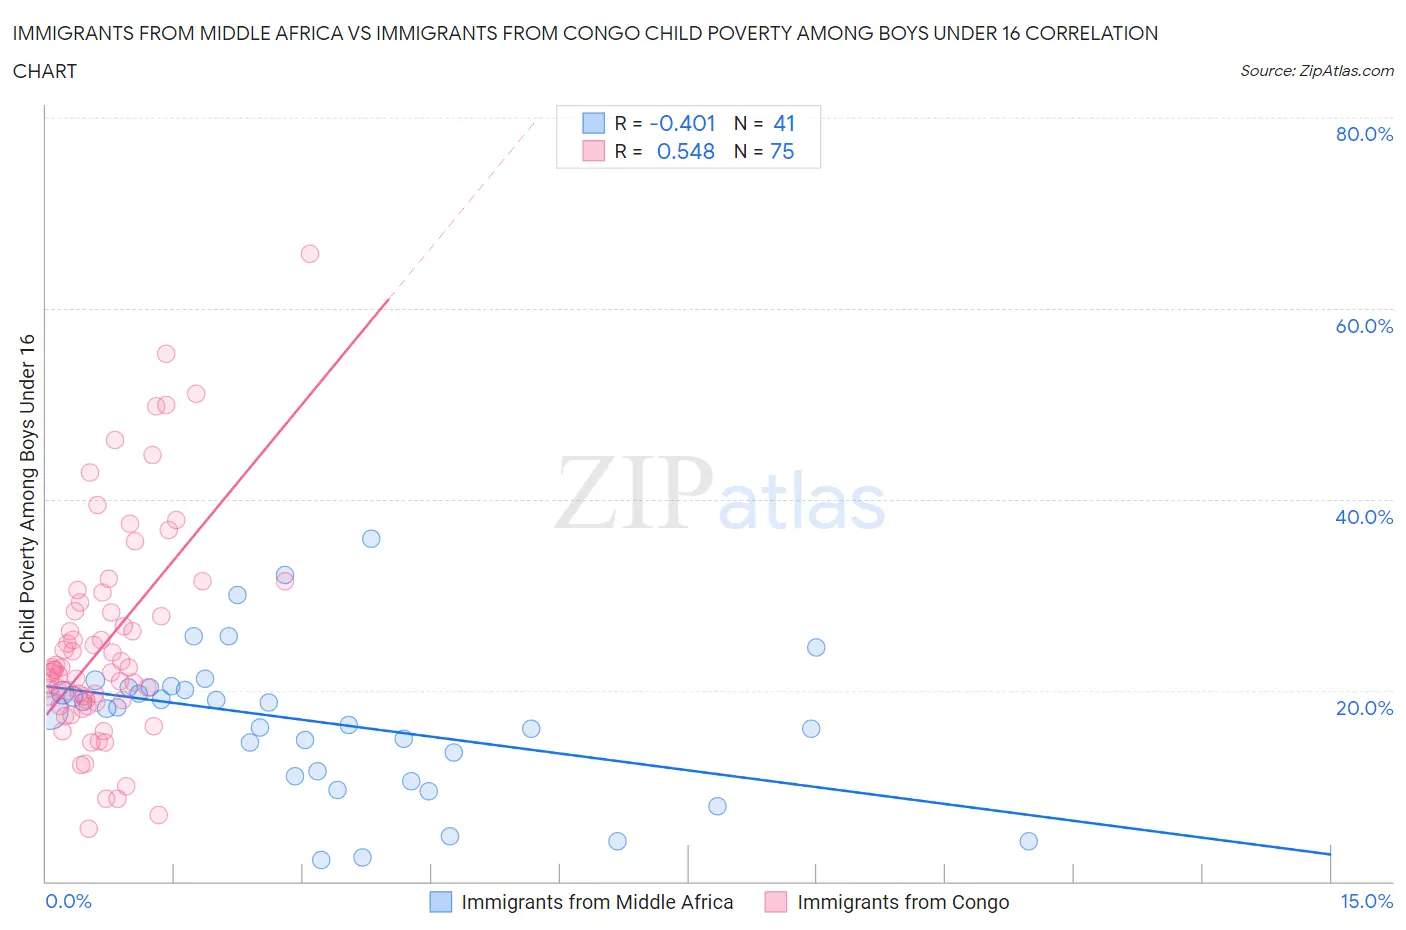 Immigrants from Middle Africa vs Immigrants from Congo Child Poverty Among Boys Under 16